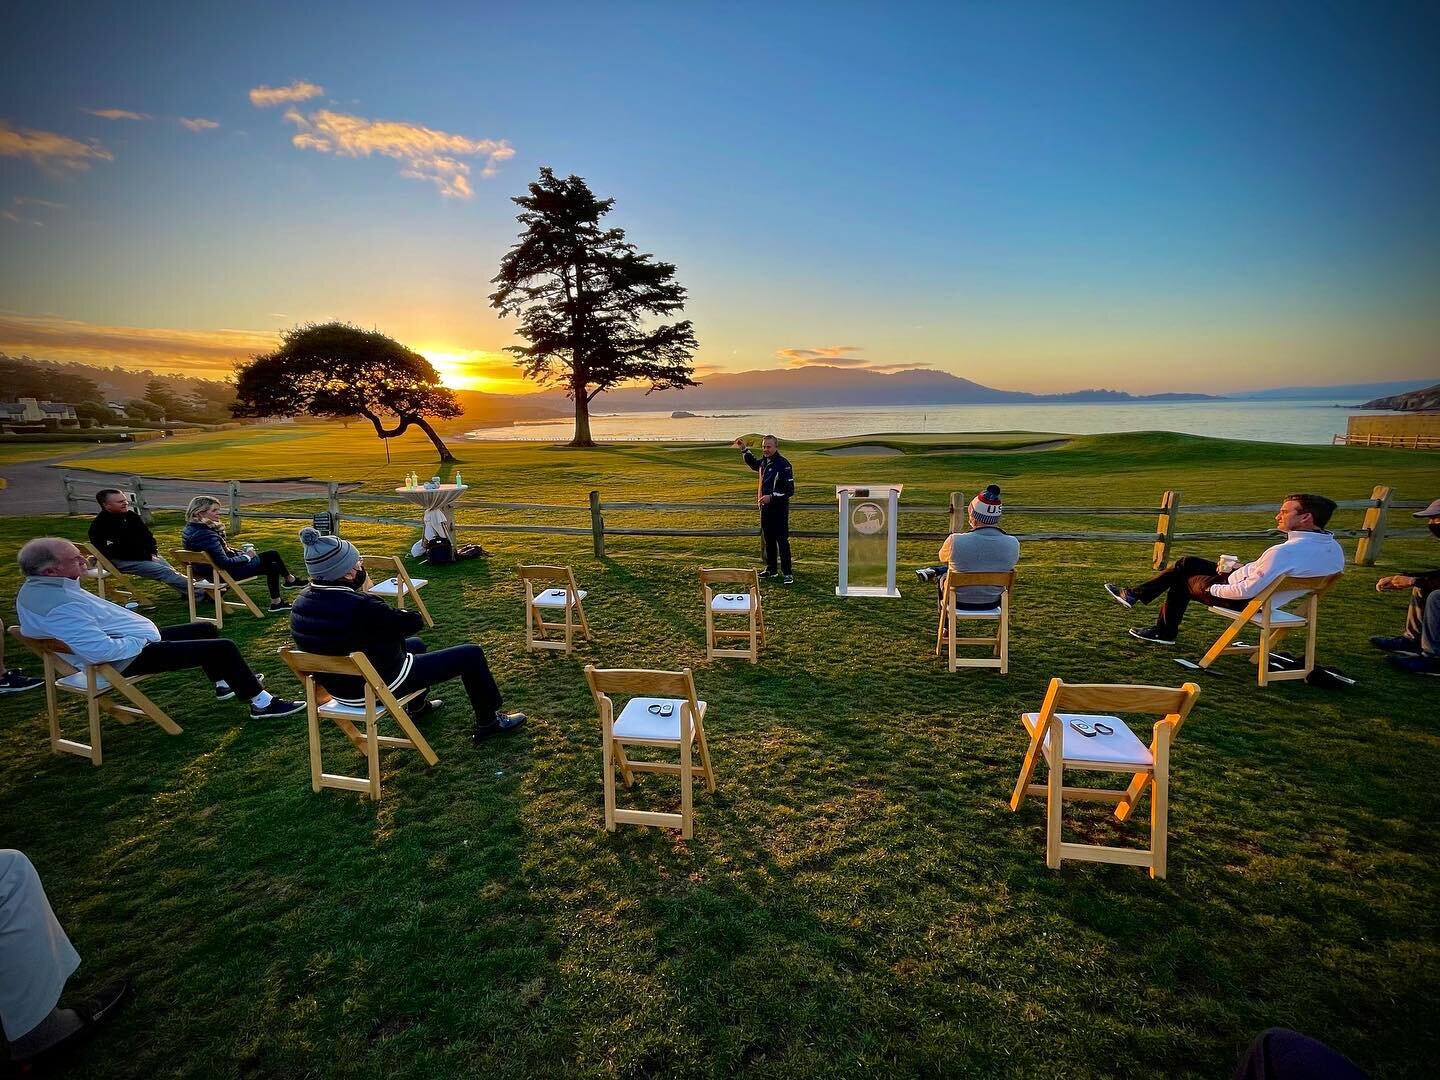 Sunday Sunrise Service at Pebble Beach 18th Green! #inhisgripstrong